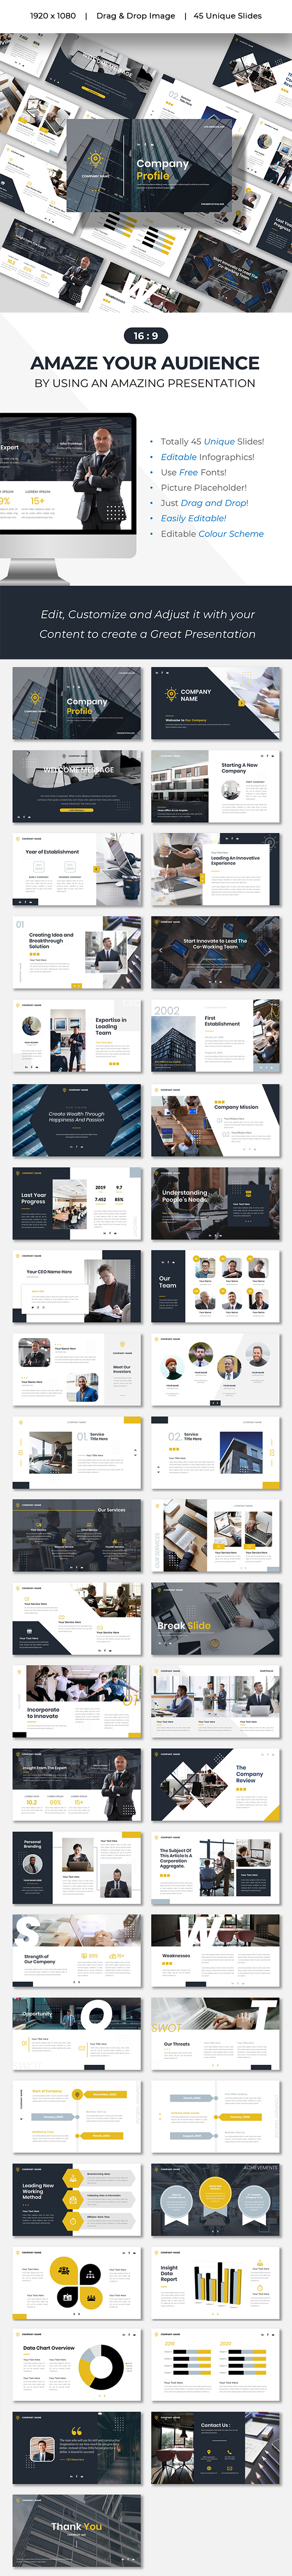 Company Profile - Business Presentation Powerpoints Template